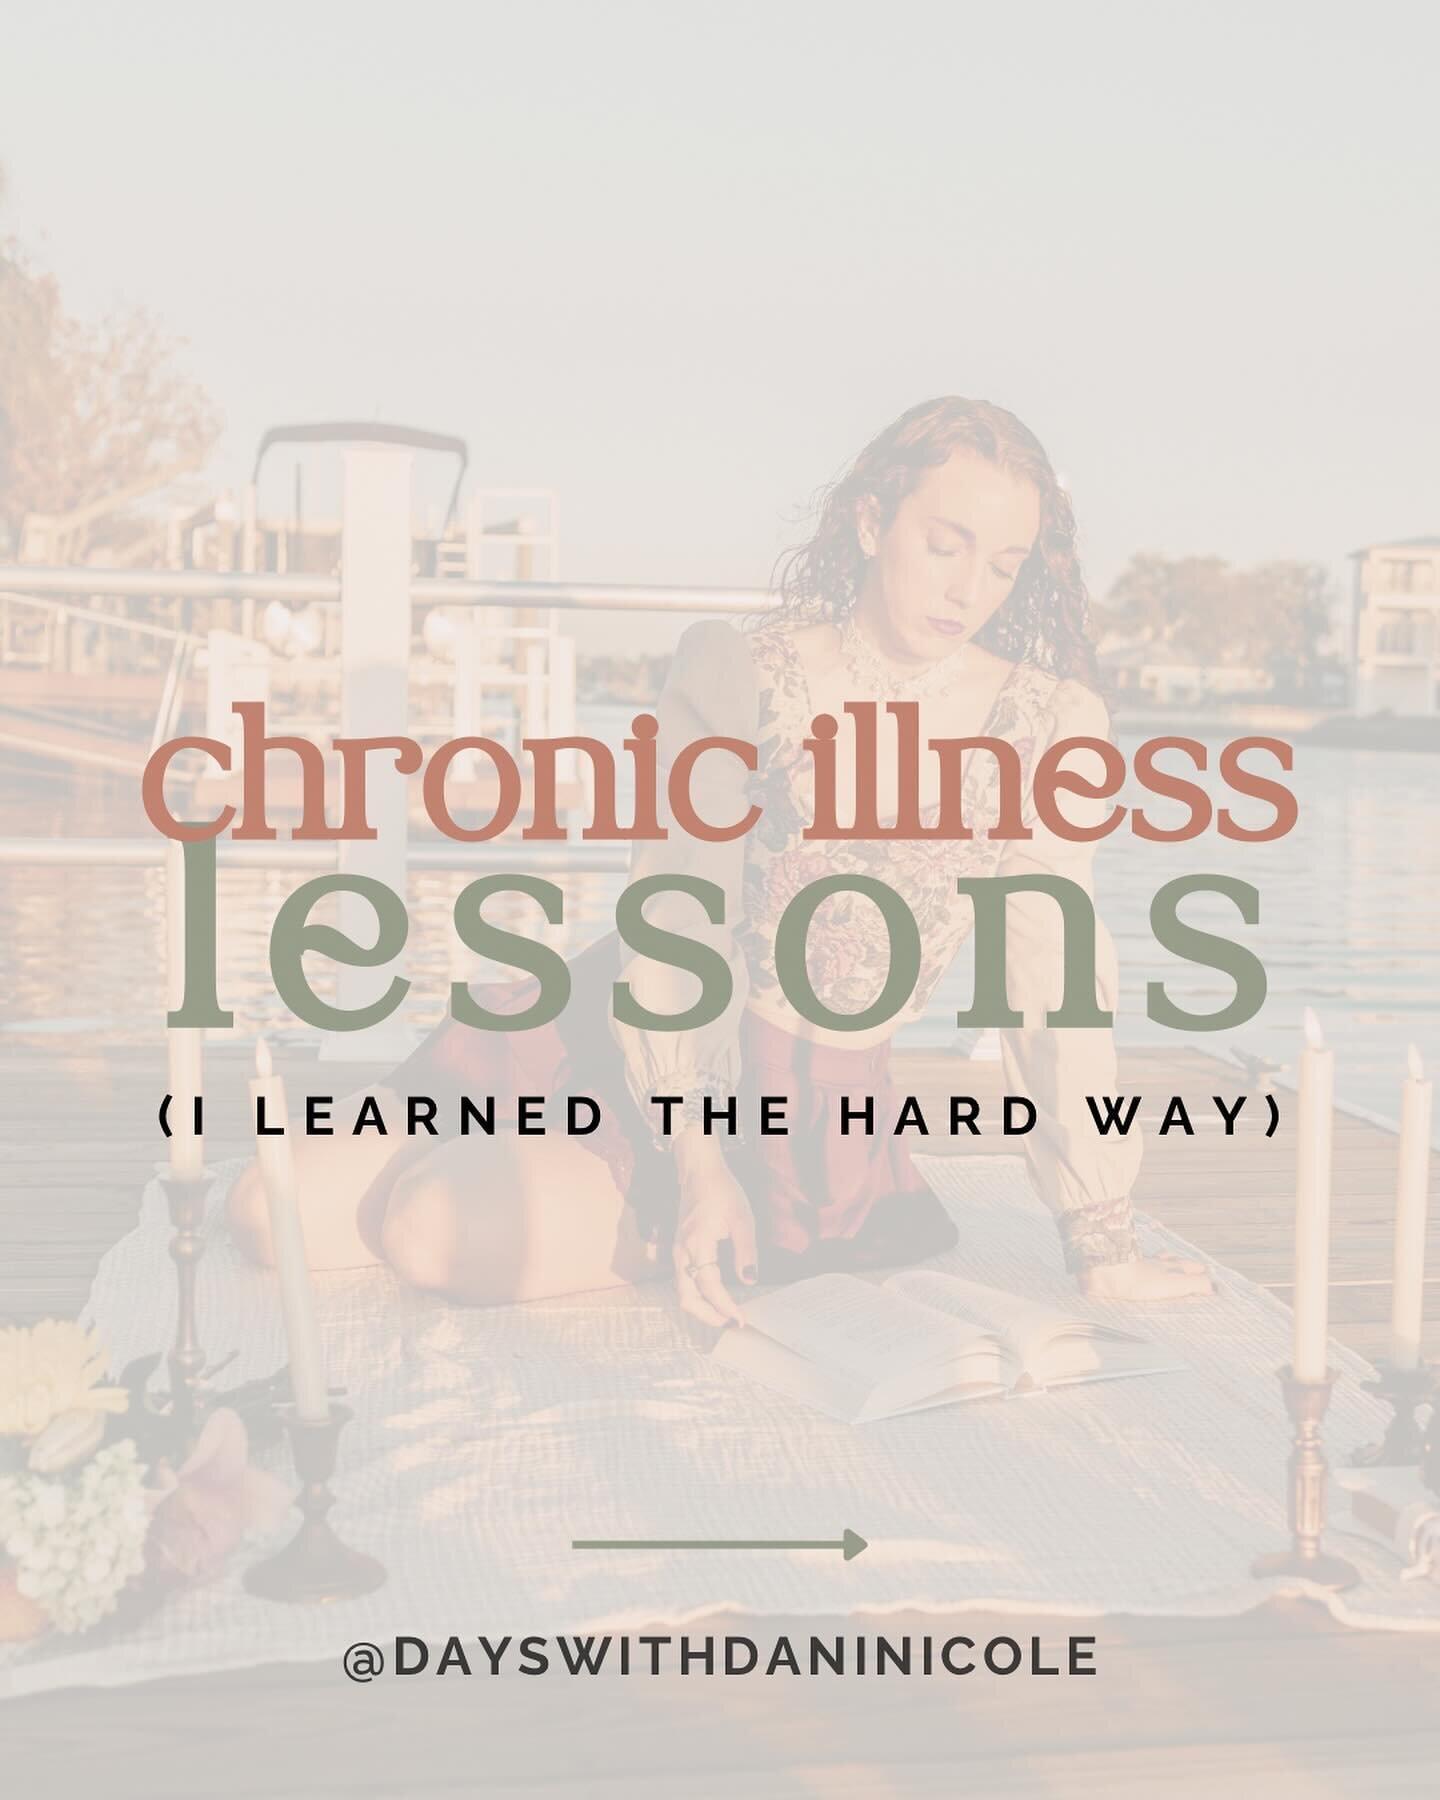 here are the most important lessons i&rsquo;ve  learned the hard way, so hopefully you don&rsquo;t have to ➔

living with a chronic illness presents all sorts of challenges. it can be isolating, and sometimes you might feel like nobody around you und